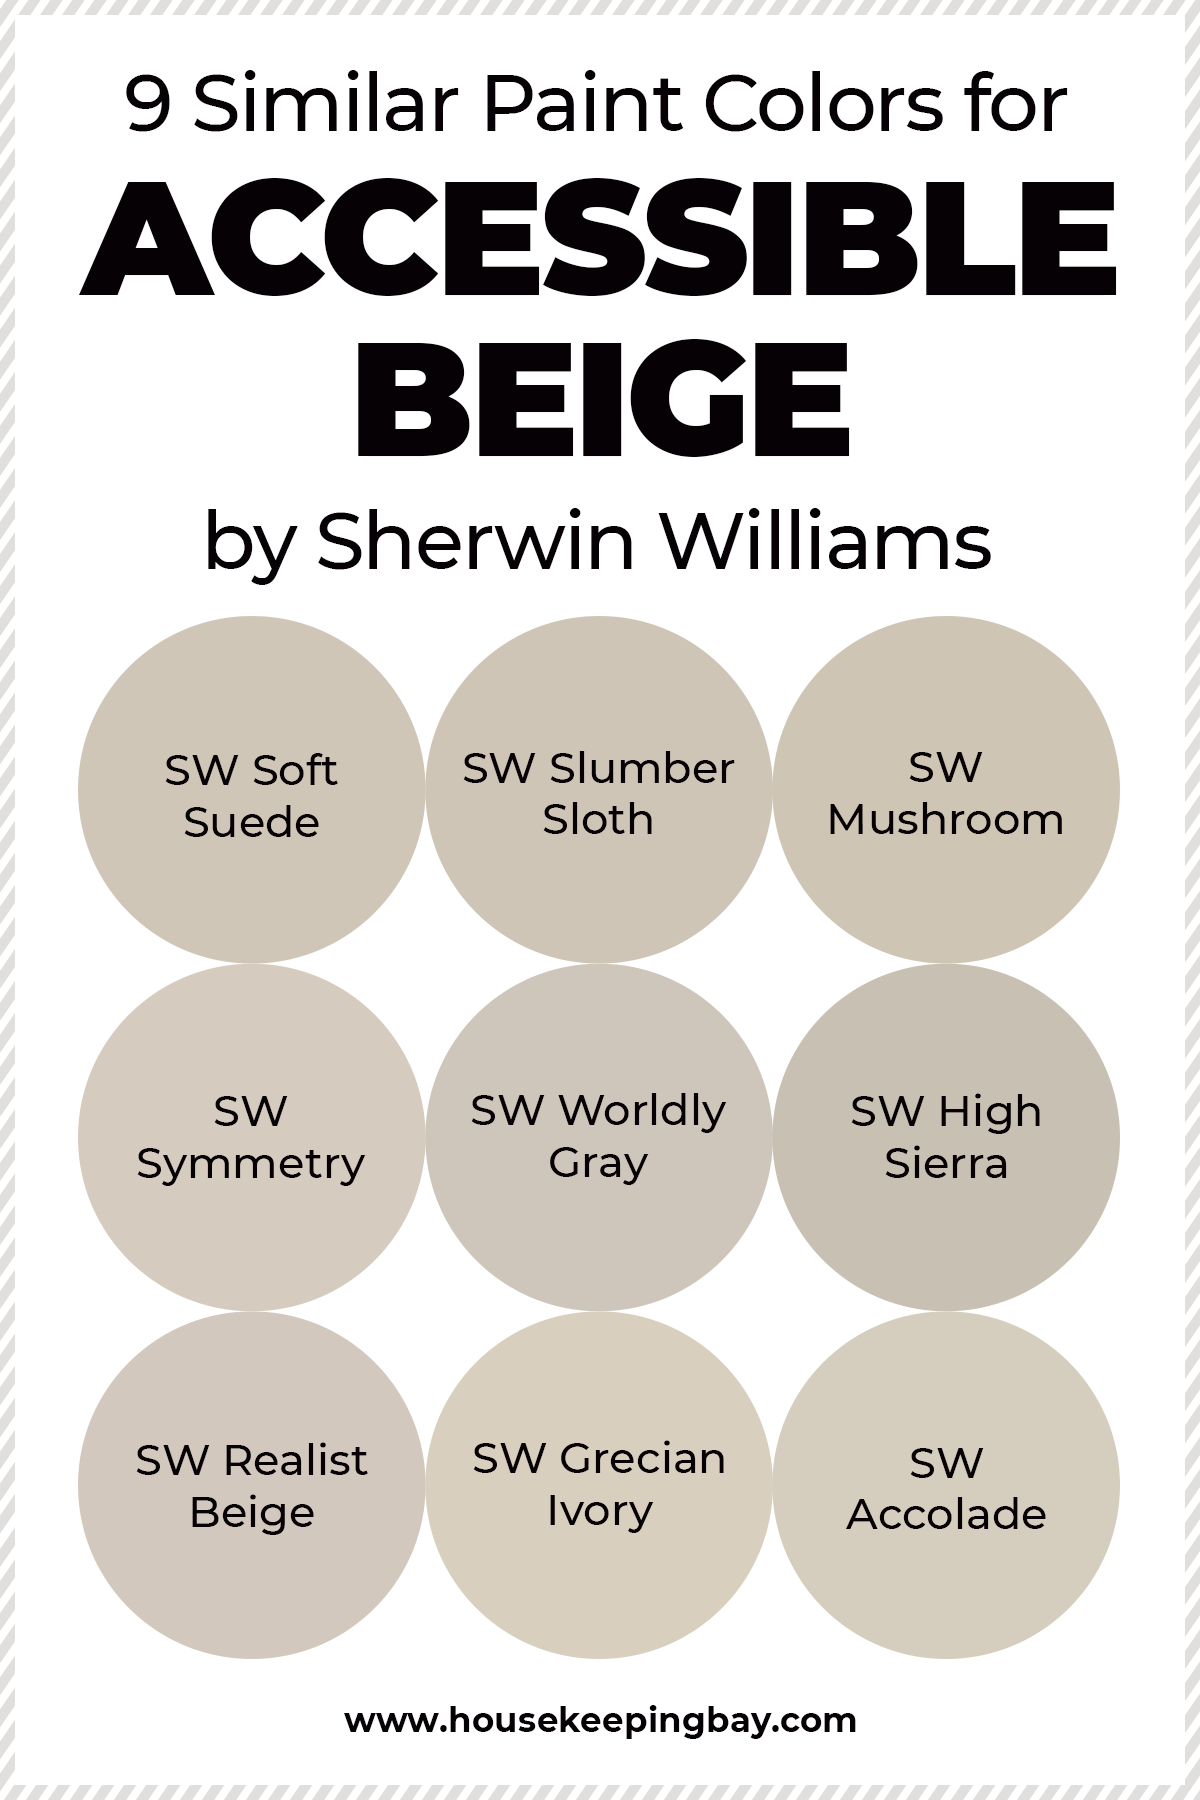 9 Similar Paint Colors for Accessible Beige by Sherwin Williams